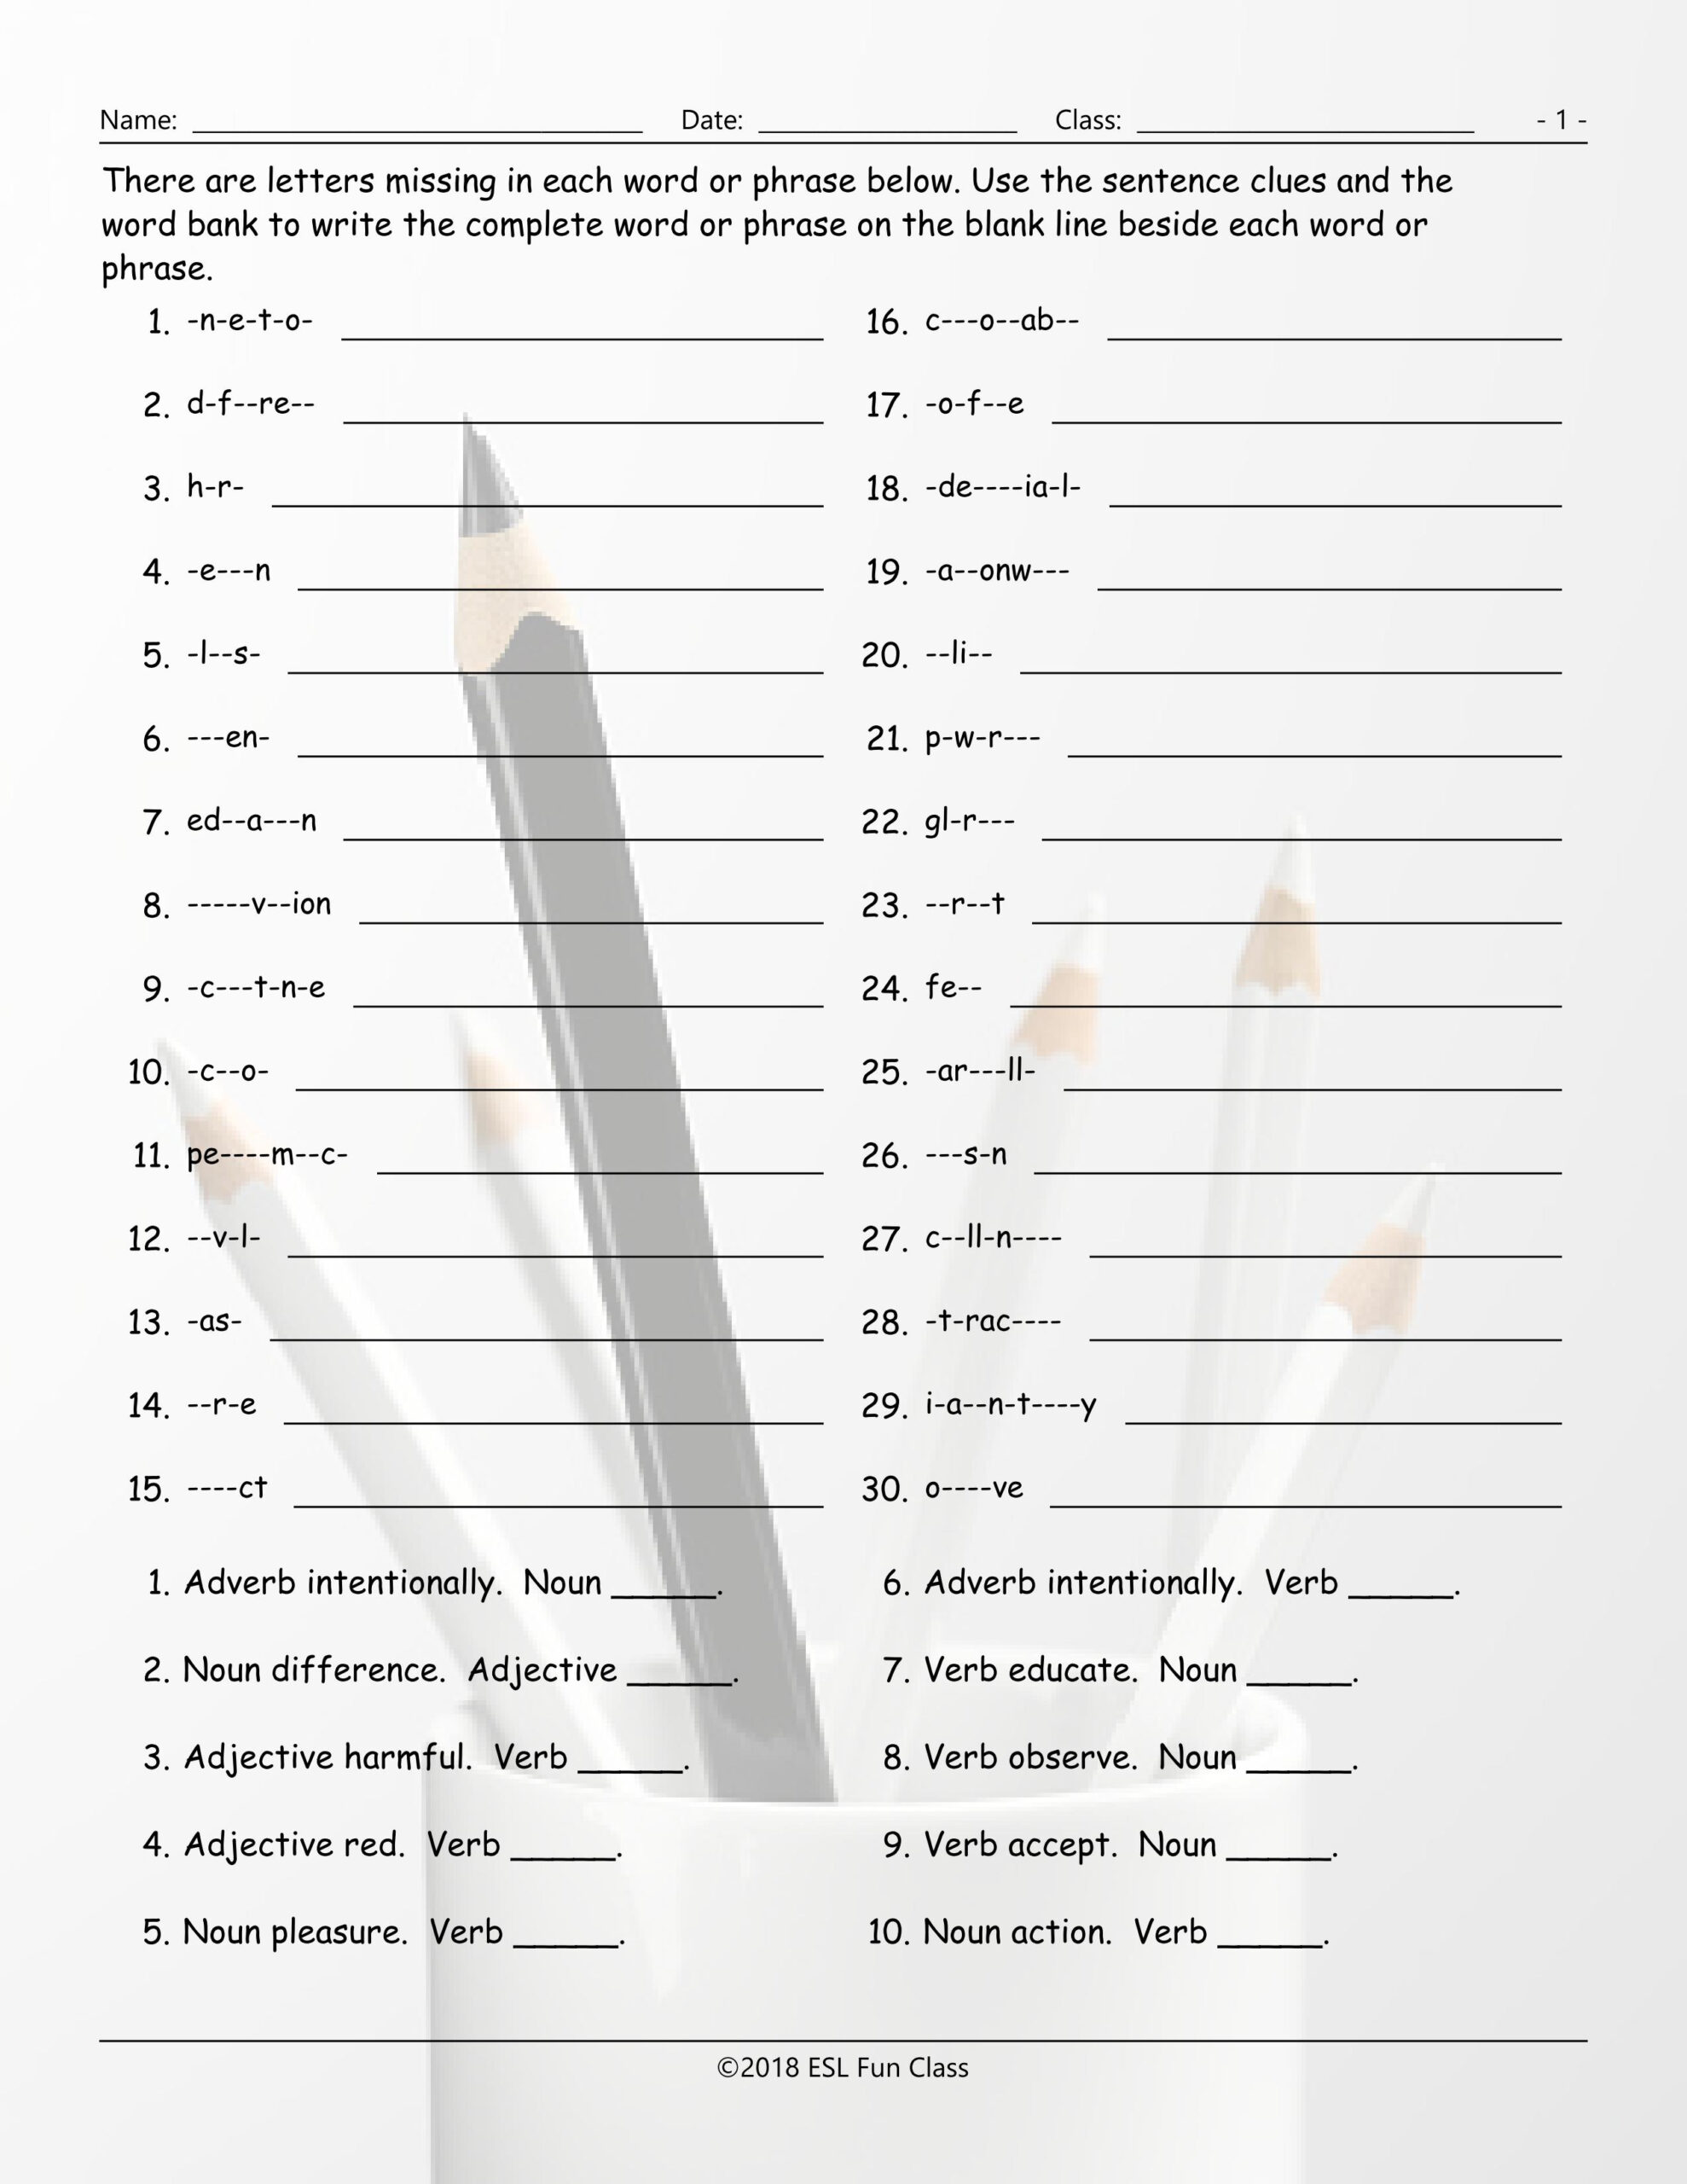 Word Forms Missing Letters Worksheet-Esl Fun Games-Have Fun! intended for Alphabet Jumble Worksheets